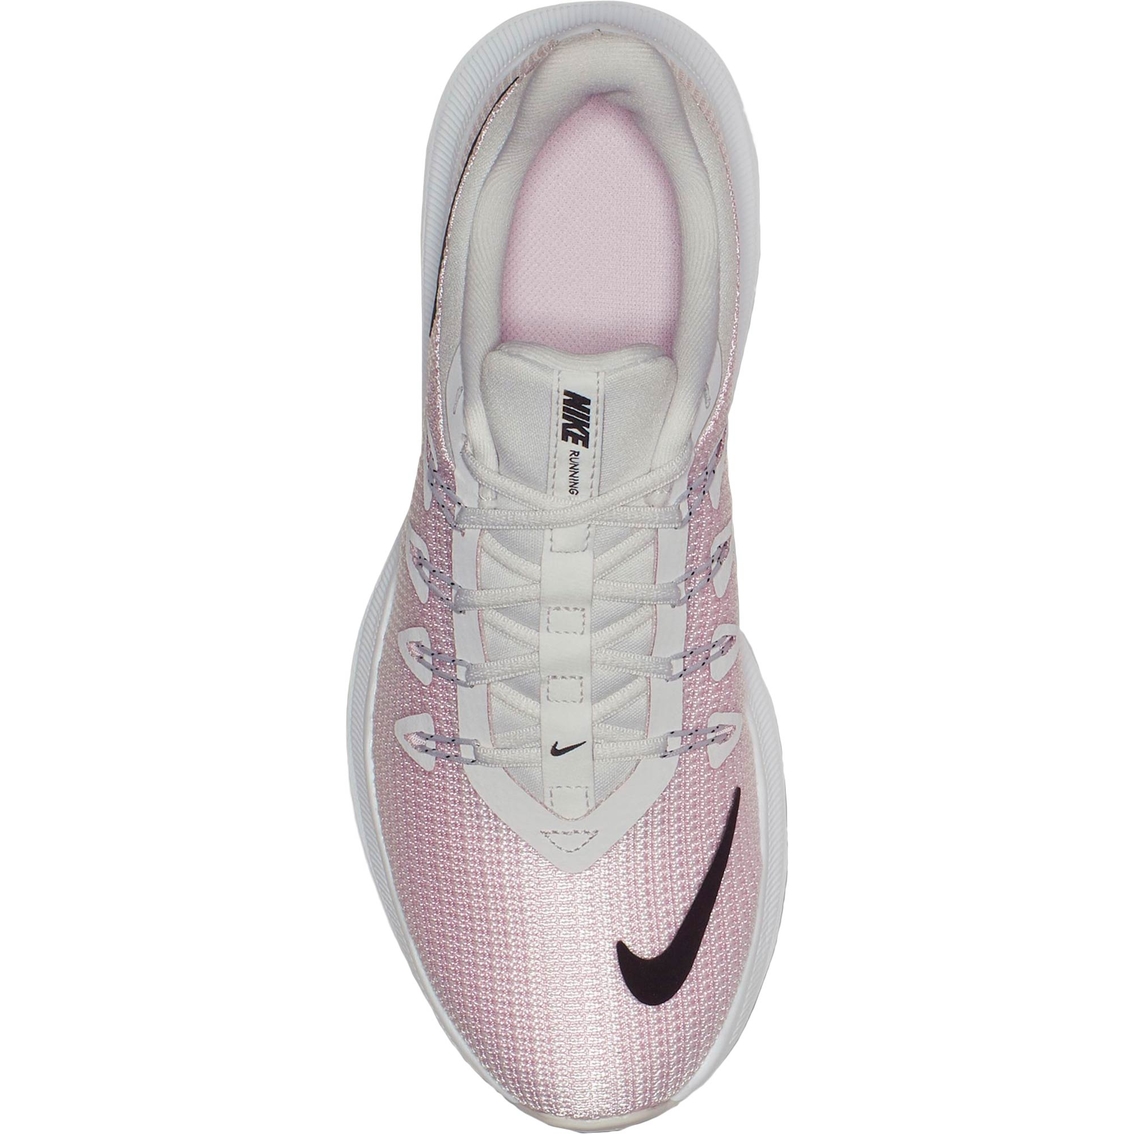 Nike Women's Quest Running Shoes - Image 4 of 6